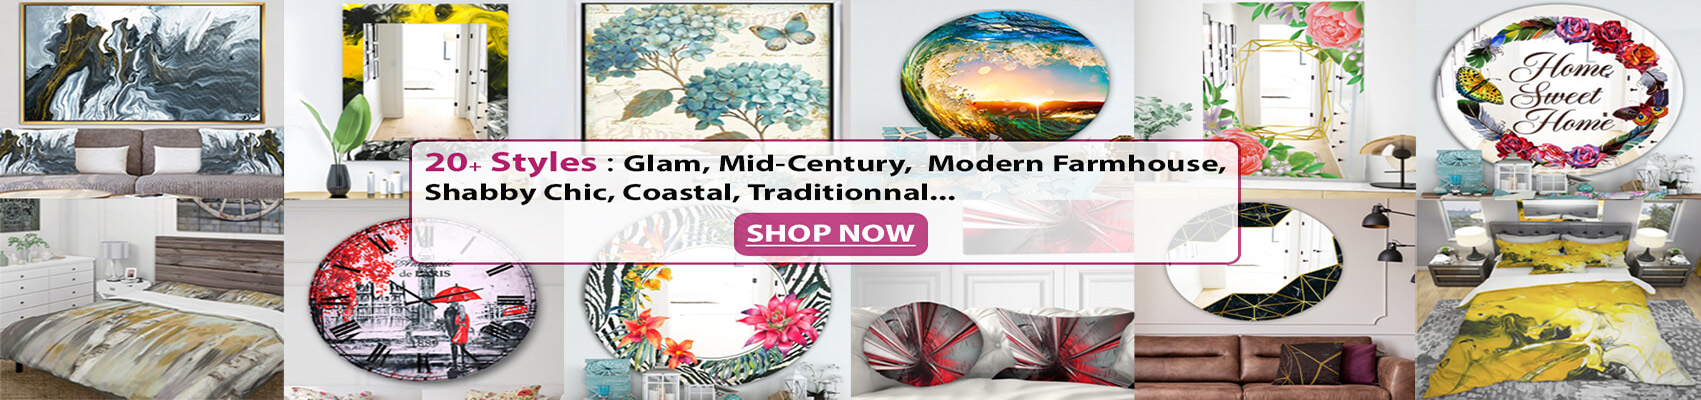 Designart | Wall Art, Accent furniture, Mirrors, Chairs, clocks and more